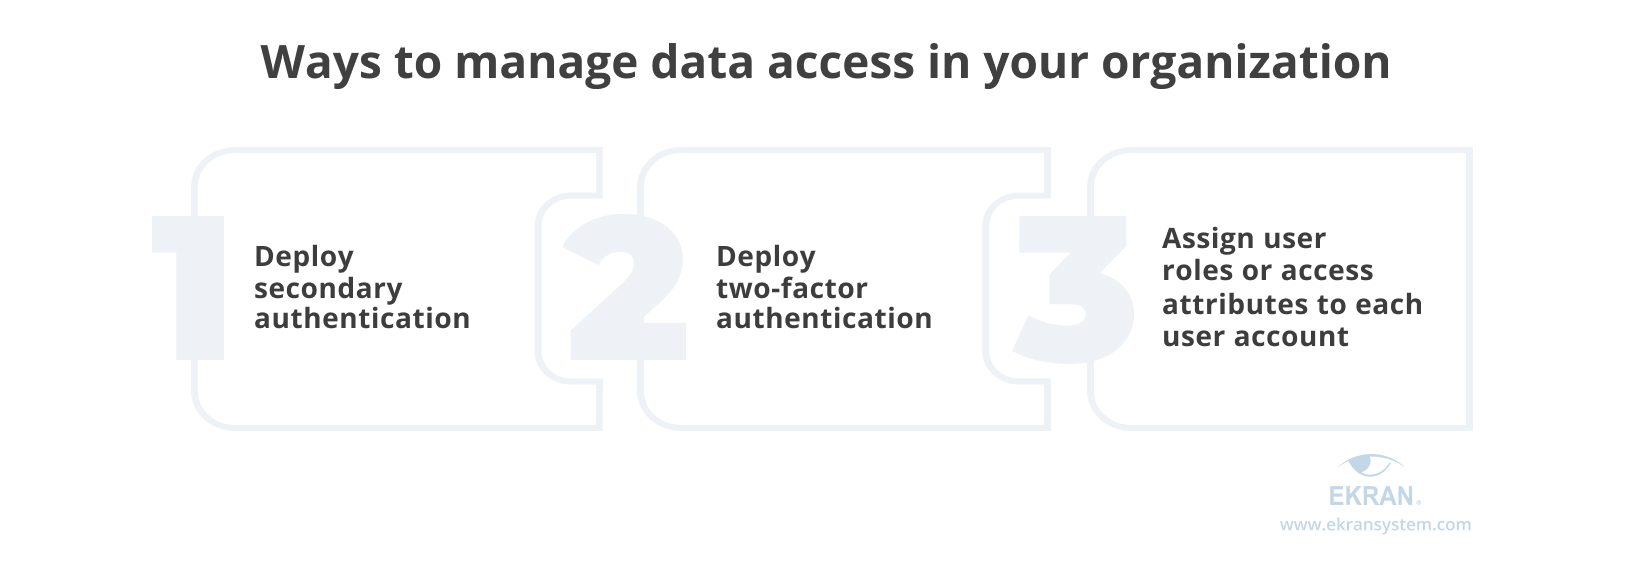 Ways to manage data access in your organization